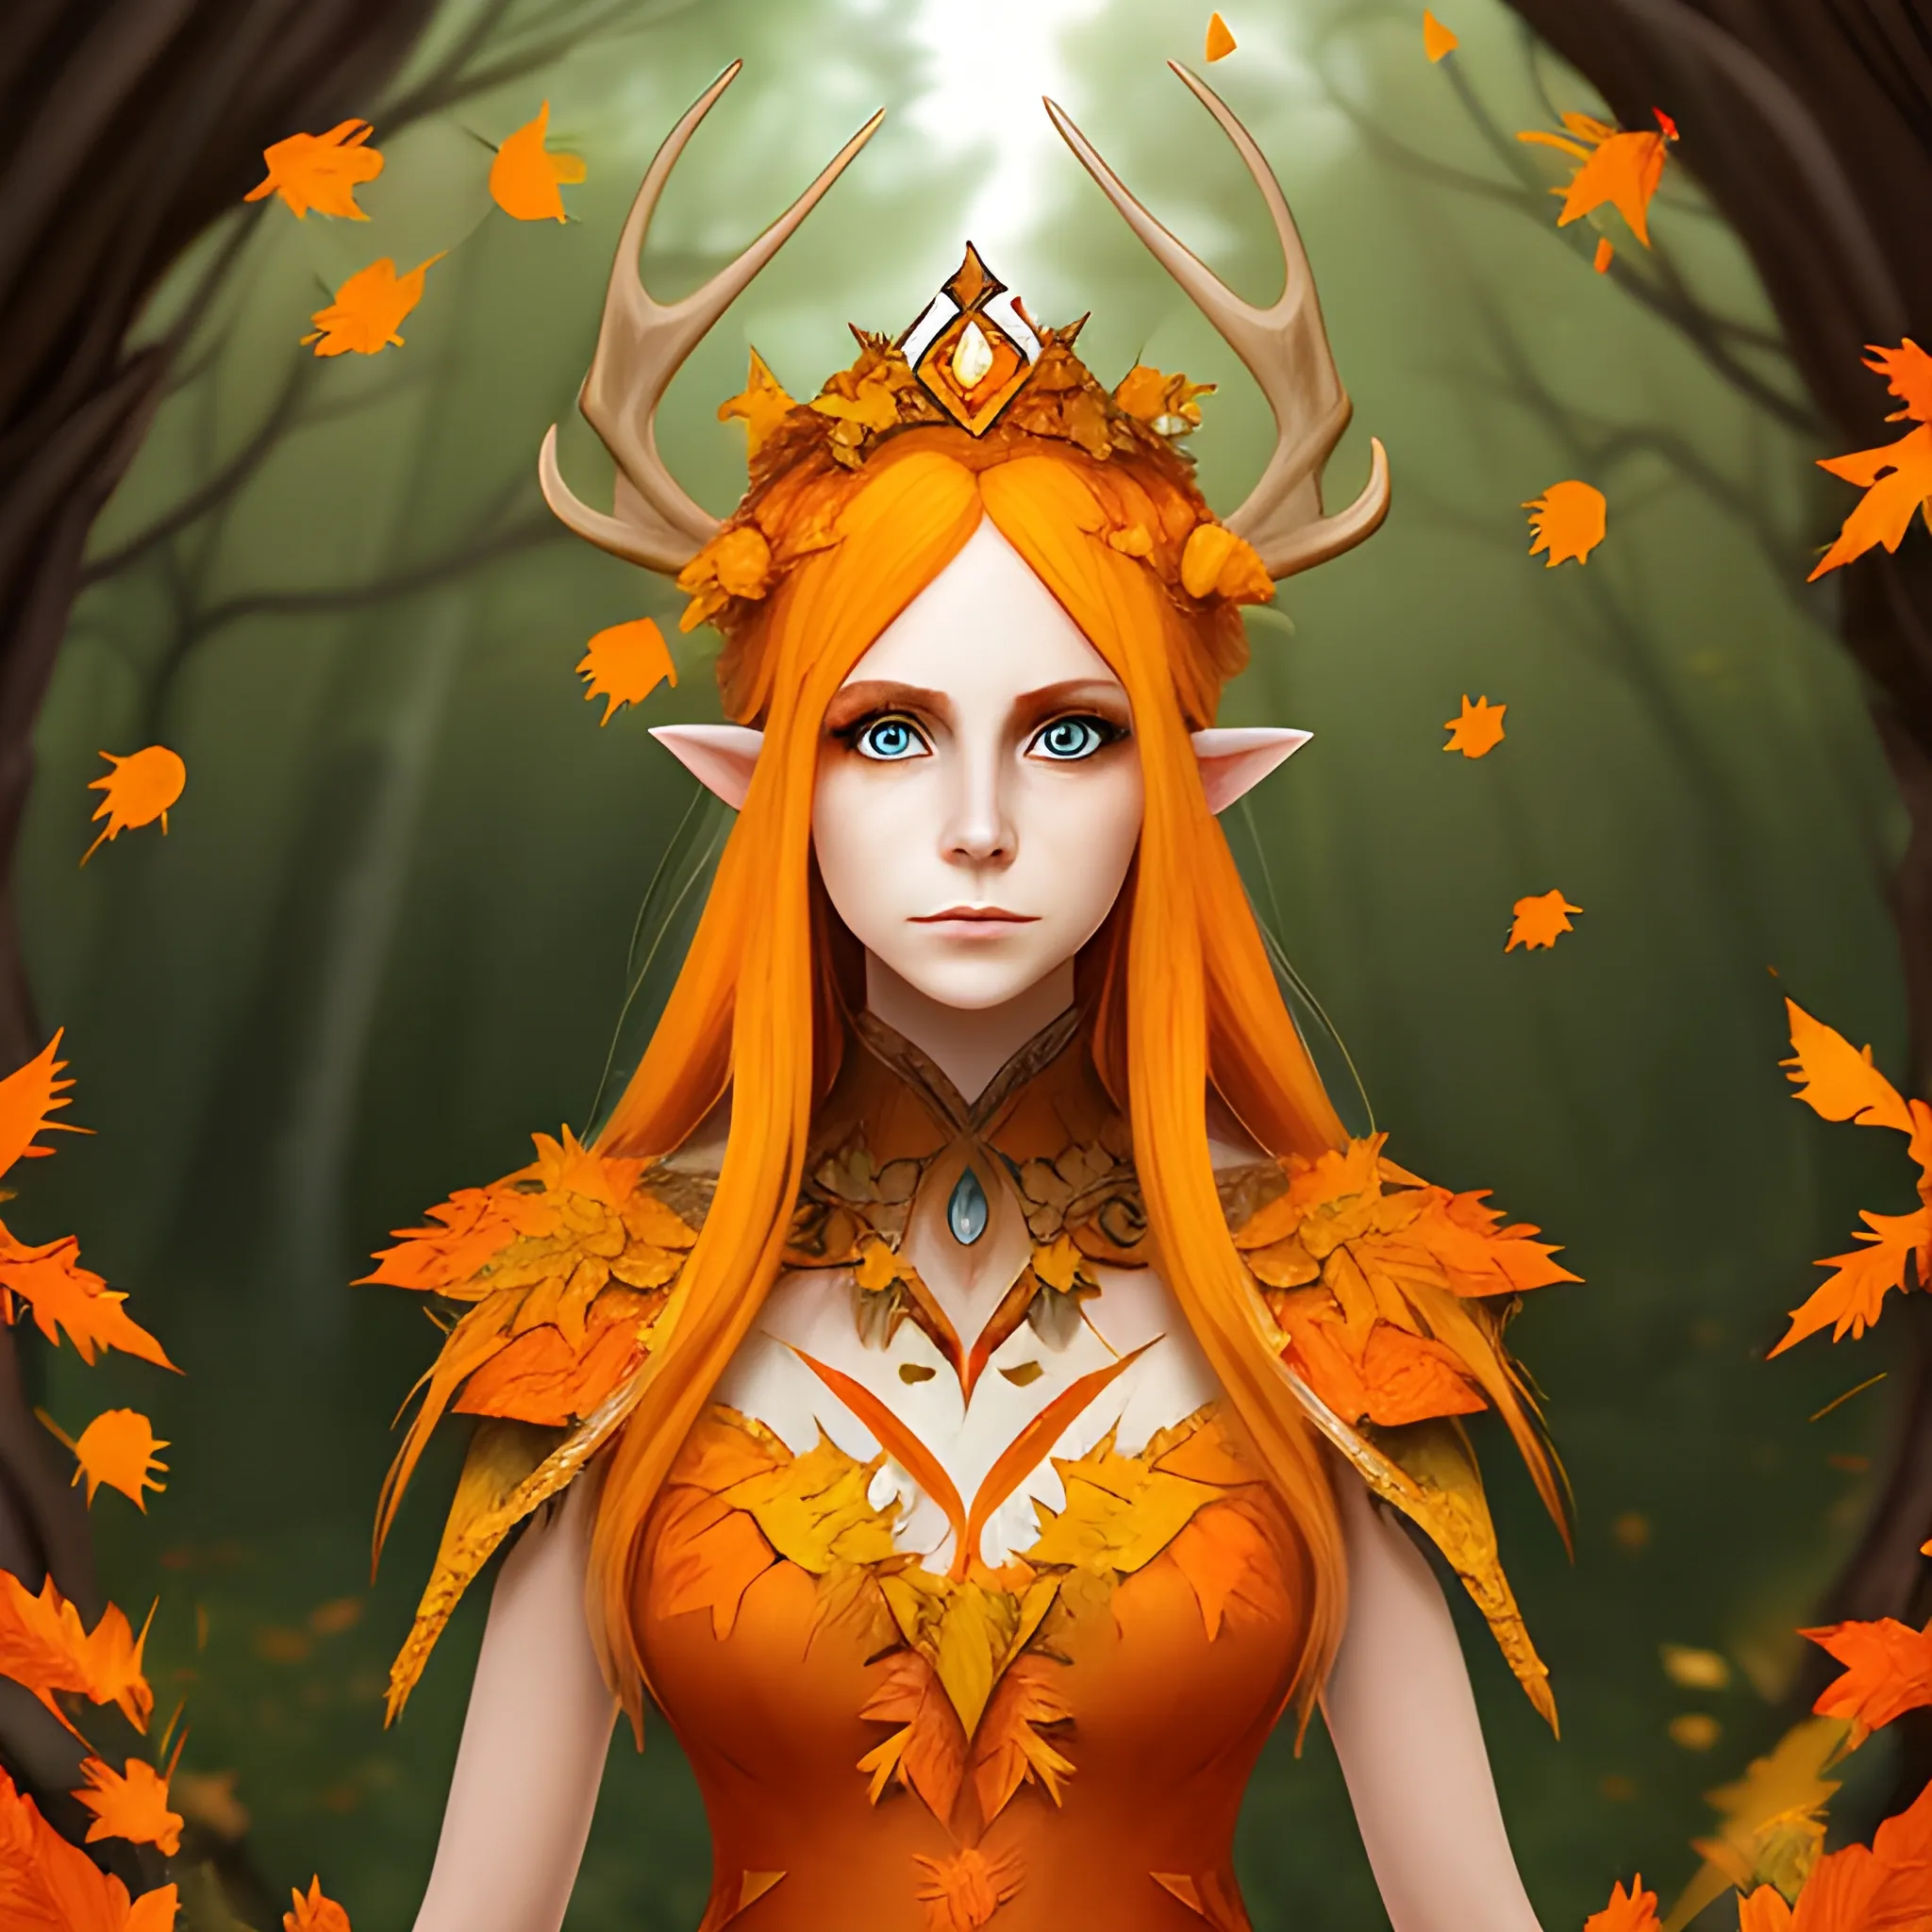 Female Eladrin with orange and yellow hair with leaves in it. Wearing a dress made of orange and yellow fallen leaves. Heart shaped face, dark brown eyes, looking forward and a crown with antlers.
Fantasy